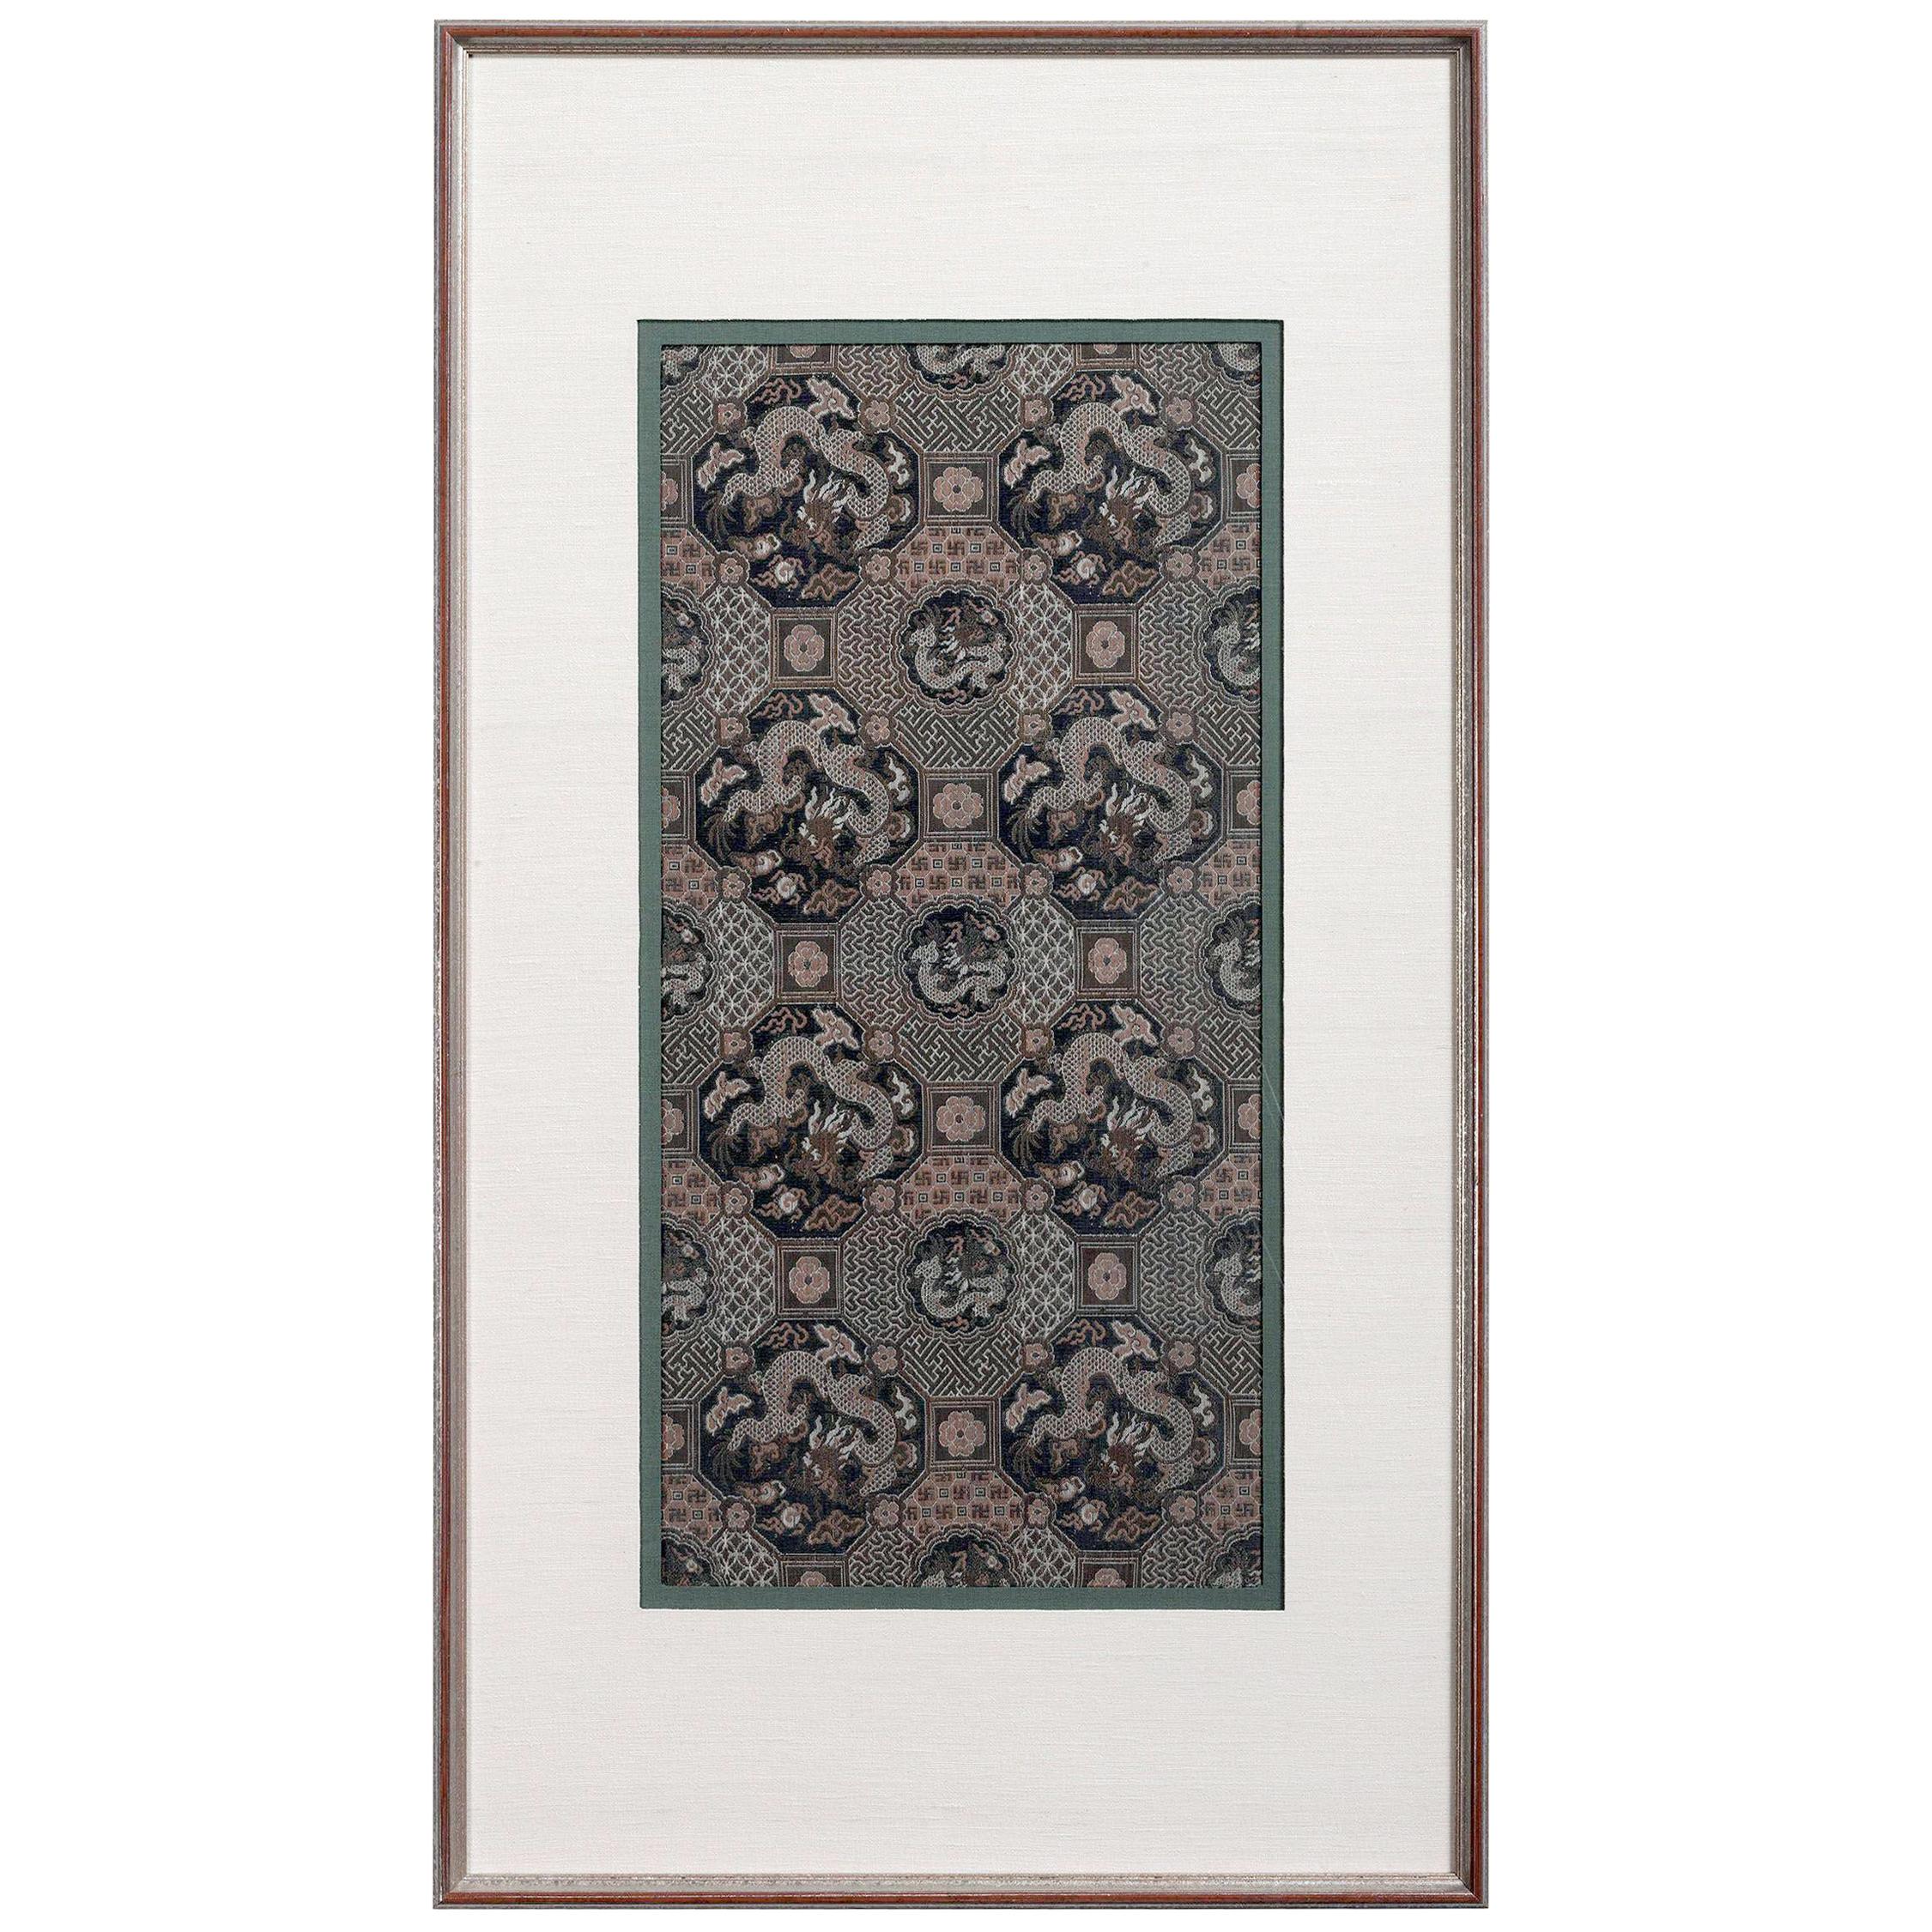 Framed Chinese Antique Brocade Dragon Panel For Sale